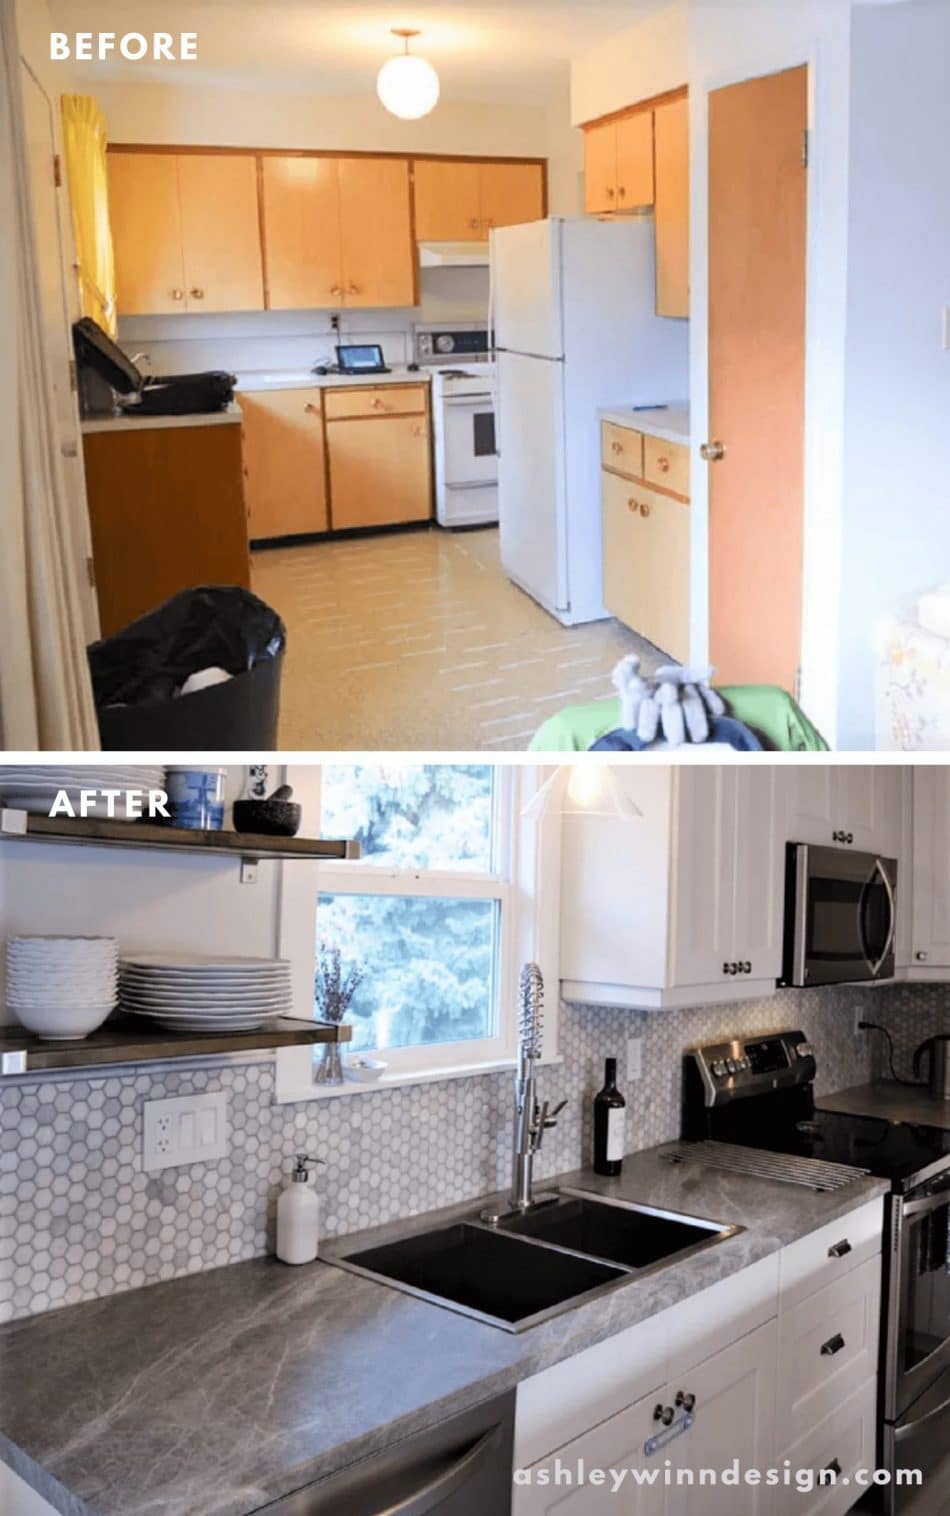 kitchen remodel before and after